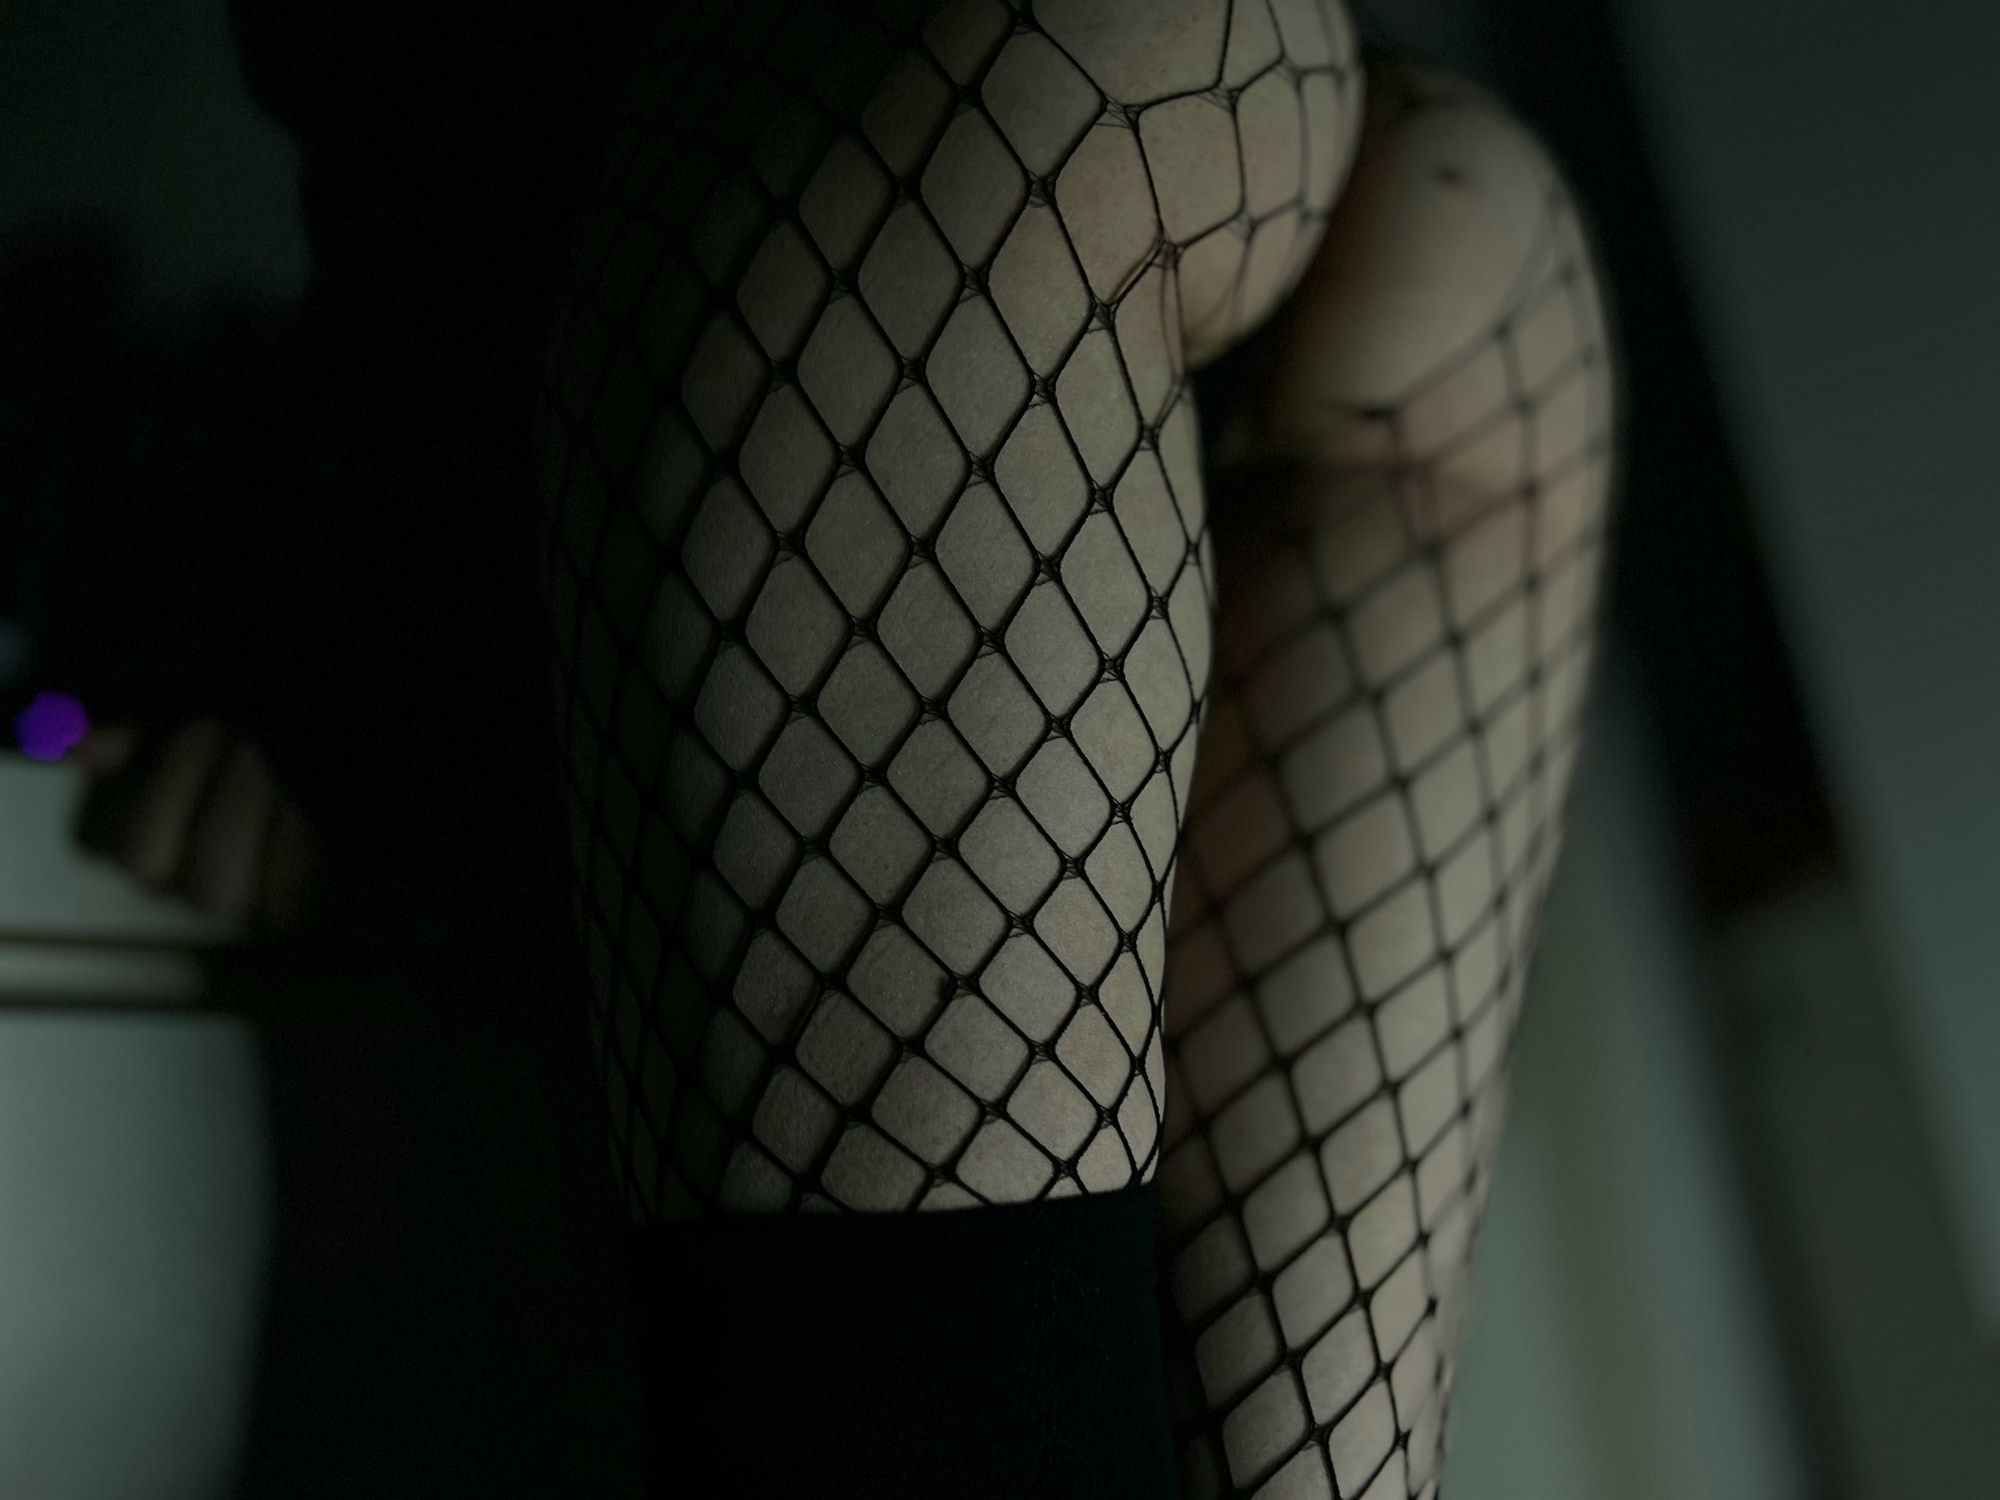 Big White ass in FIshnet #5